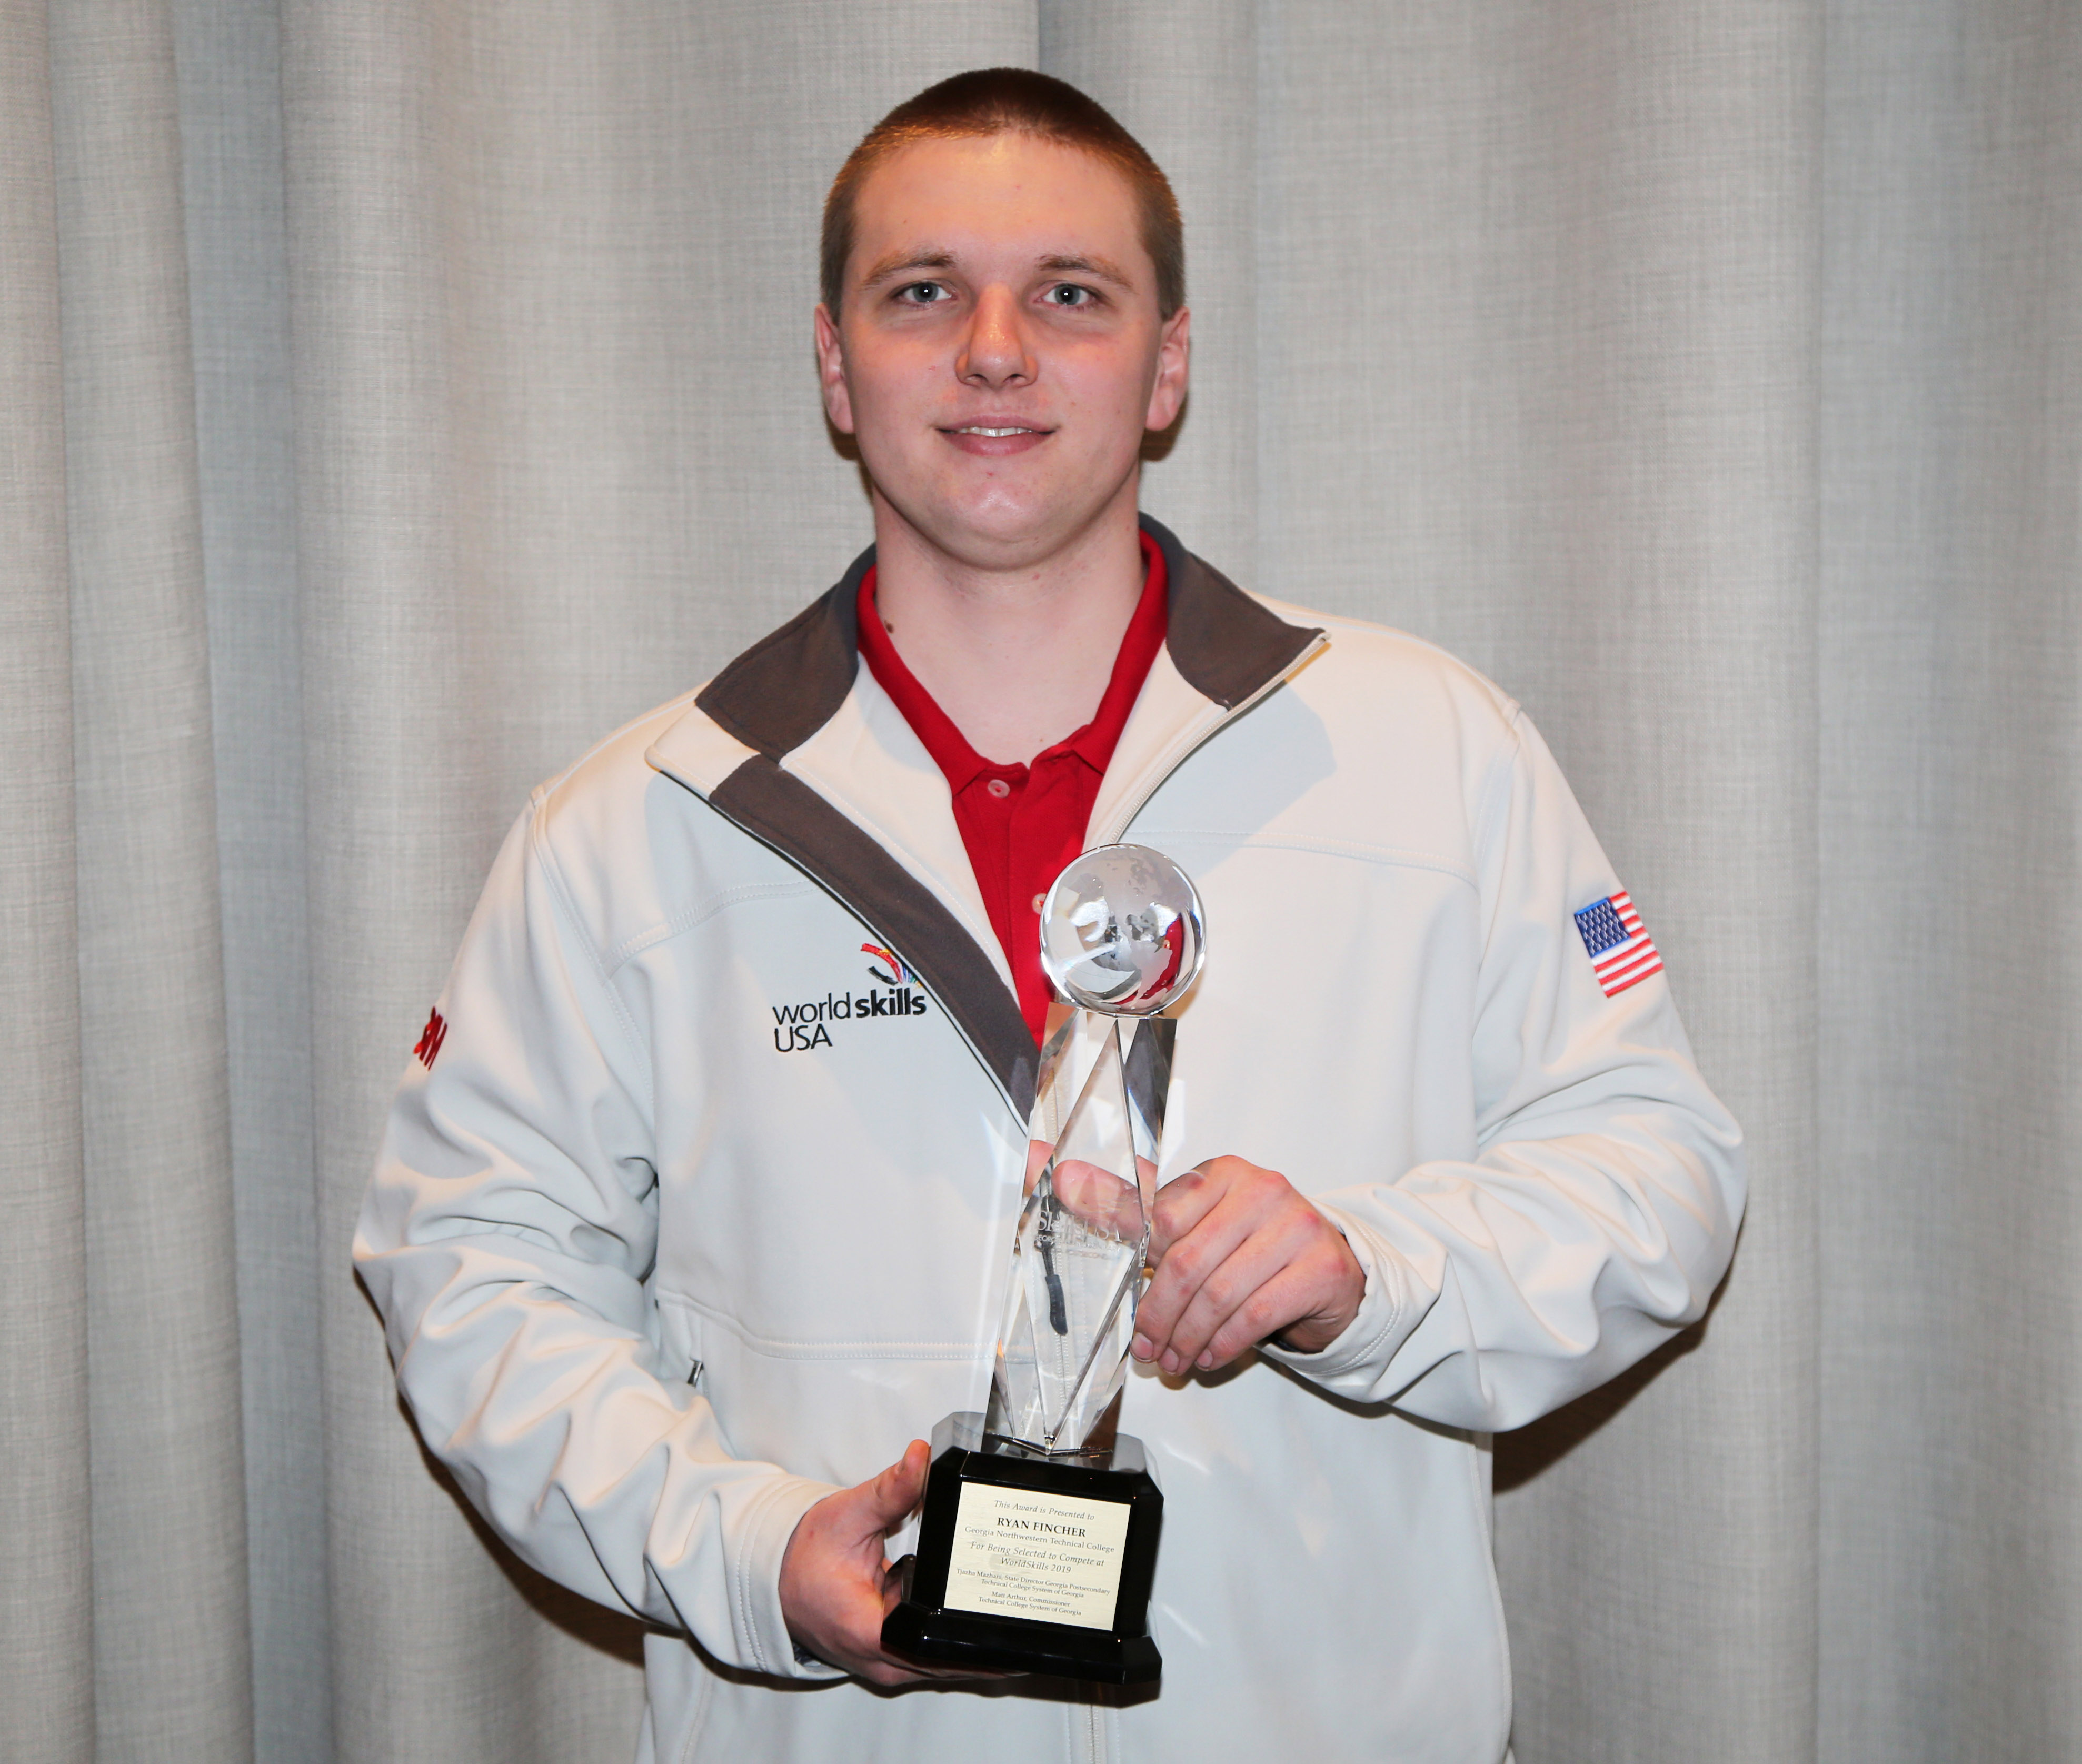 GNTC alumnus Ryan Fincher of Cedartown poses for a picture with the trophy awarded to him at a special presentation during the opening ceremony for SkillsUSA Georgia in March. Fincher was recognized for being selected as the SkillsUSA World Team Welder to represent the county at the WorldSkills Welding Competition in Kazan, Russia.